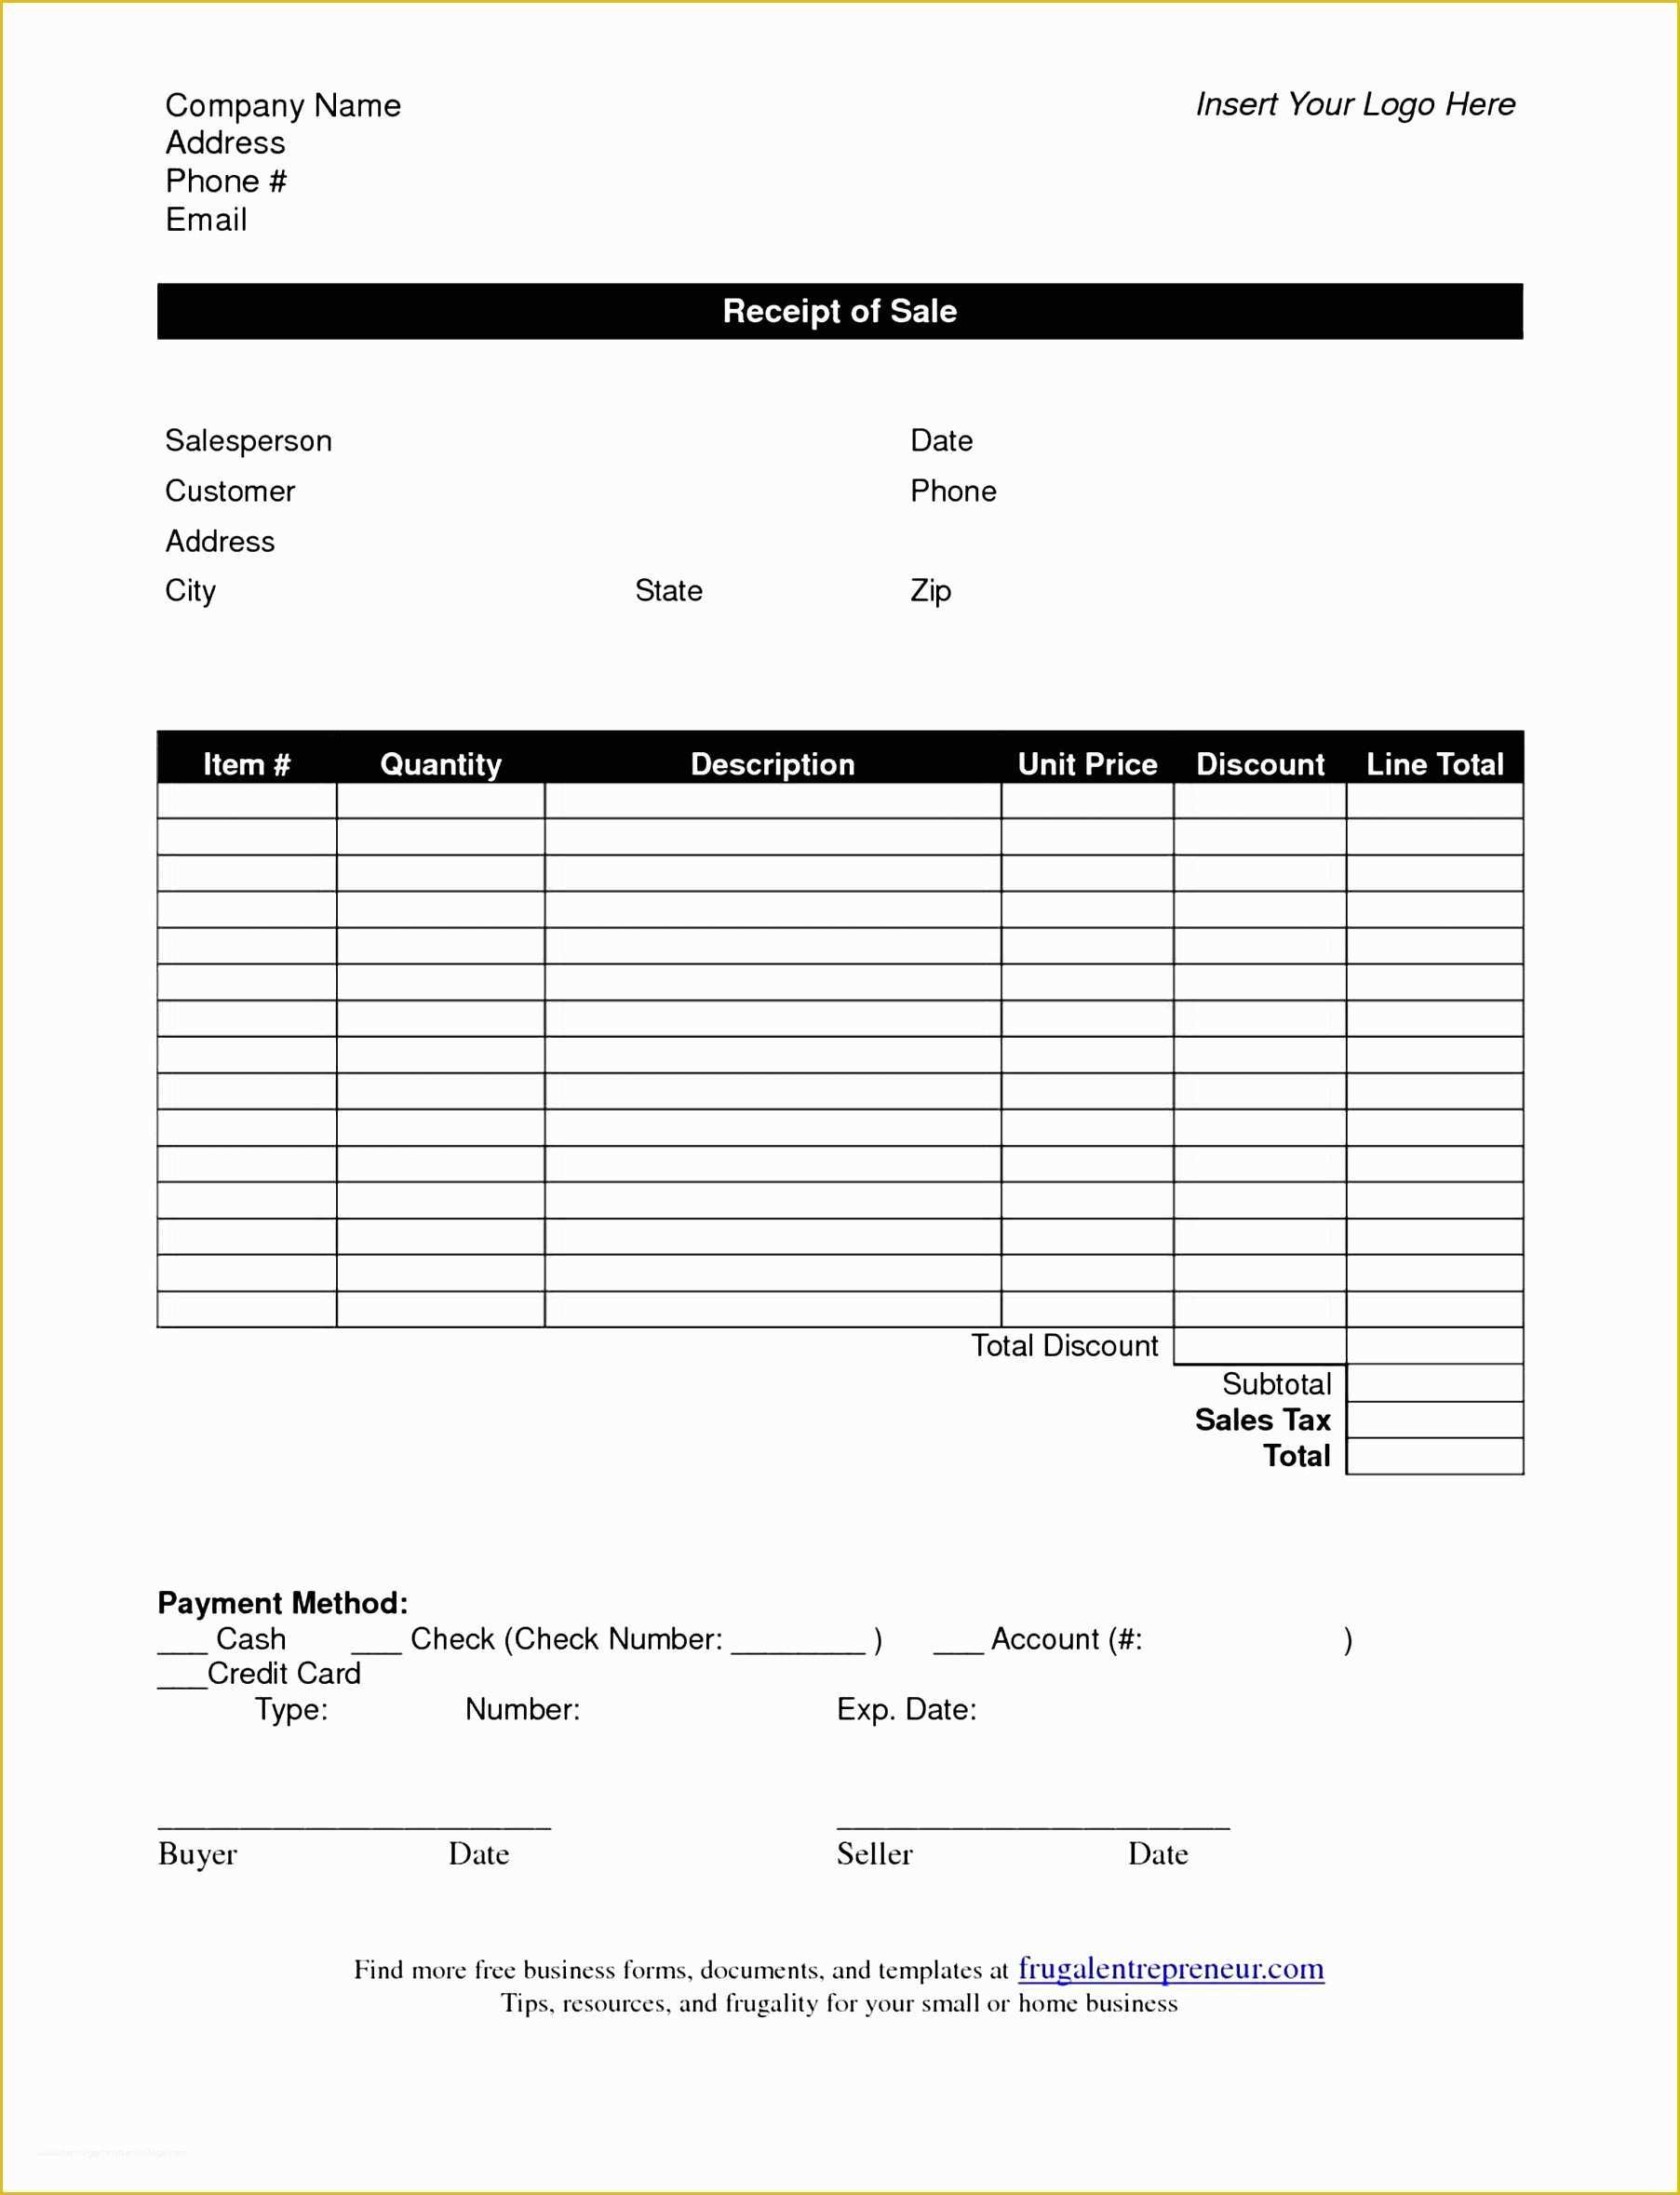 Free Sales Invoice Template Word Of 10 Blank Invoice Template for Sales Sampletemplatess